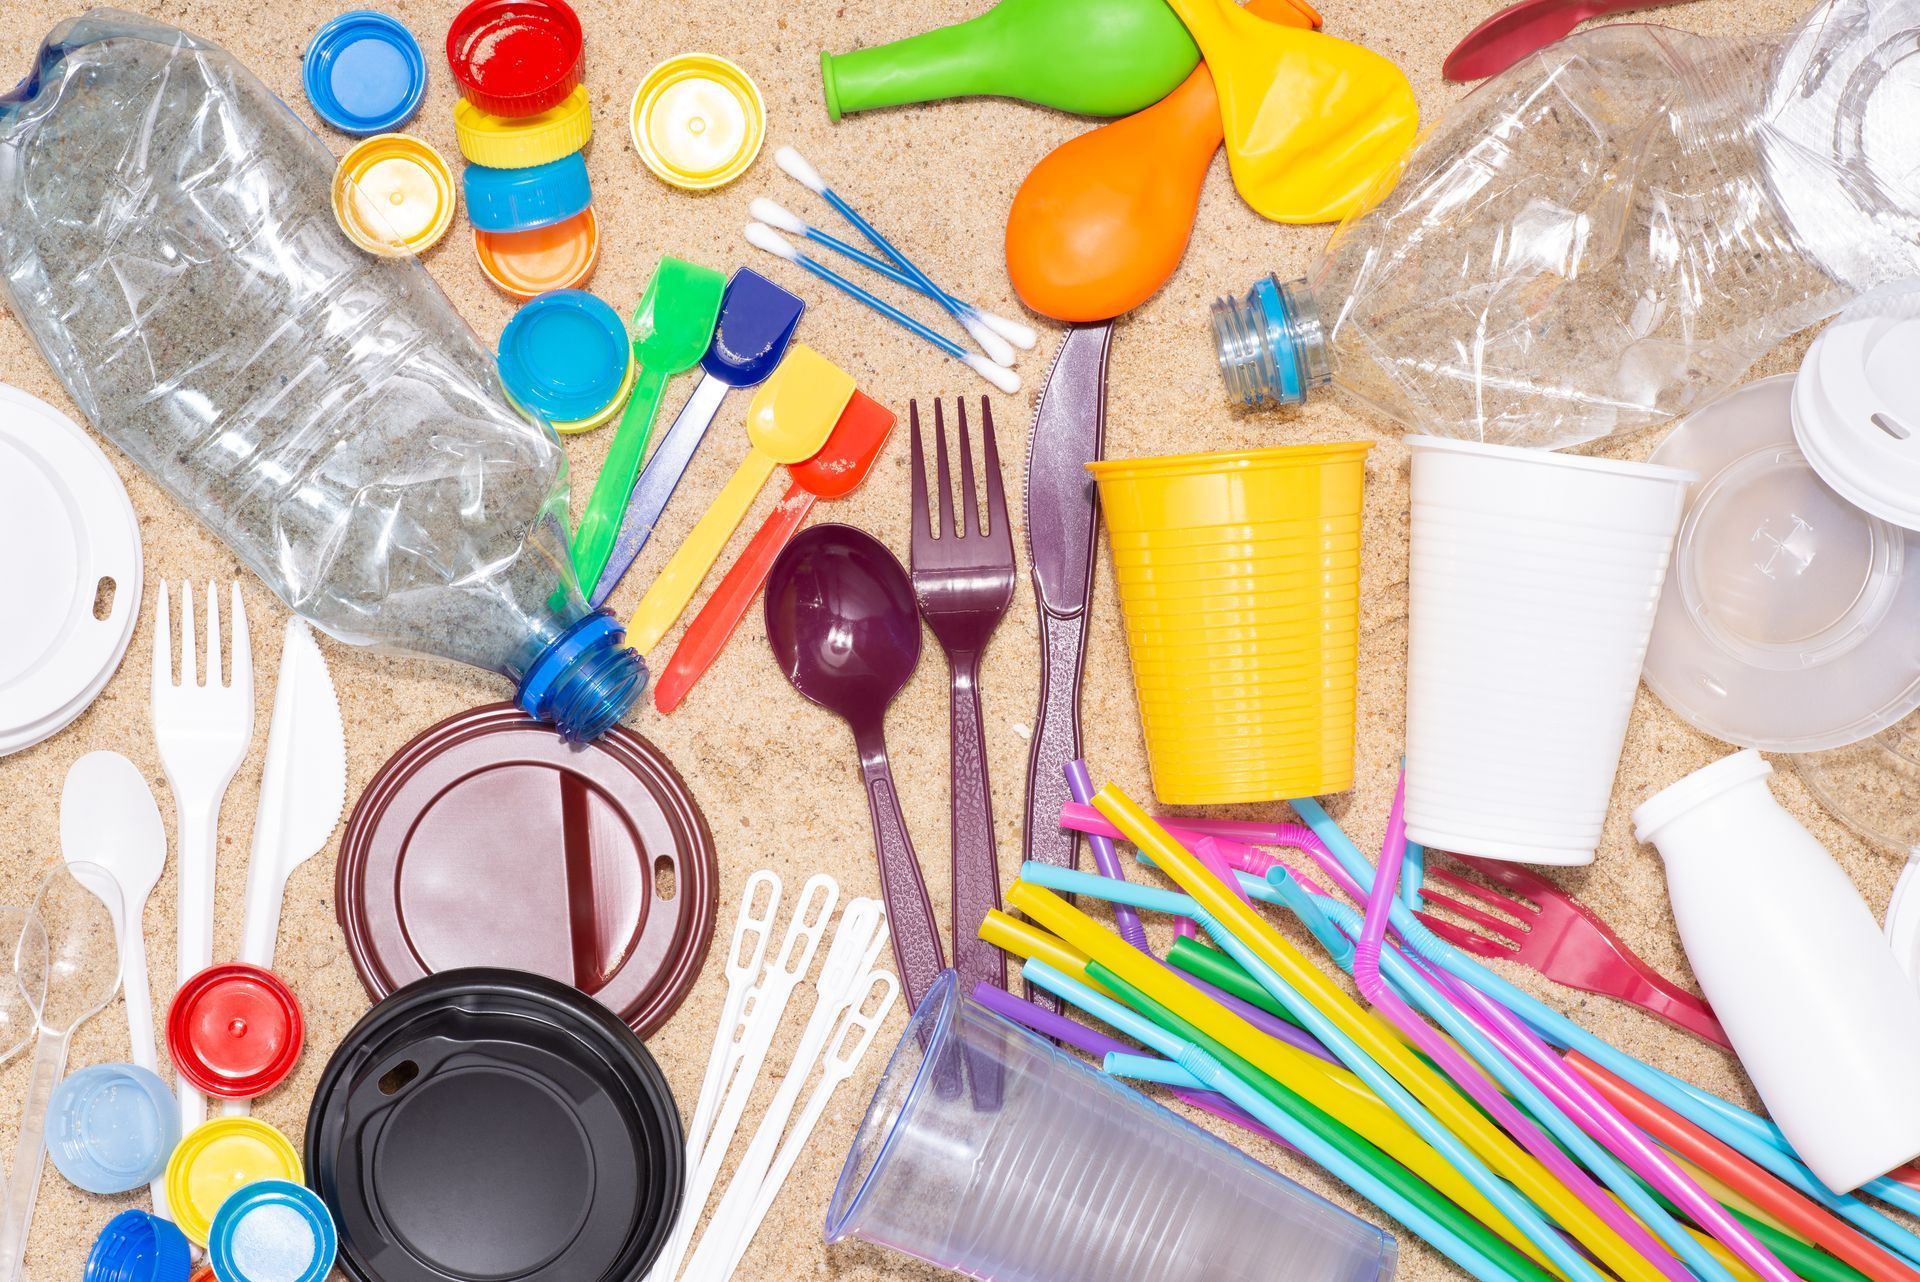 there are many different types of plastic utensils on the table .